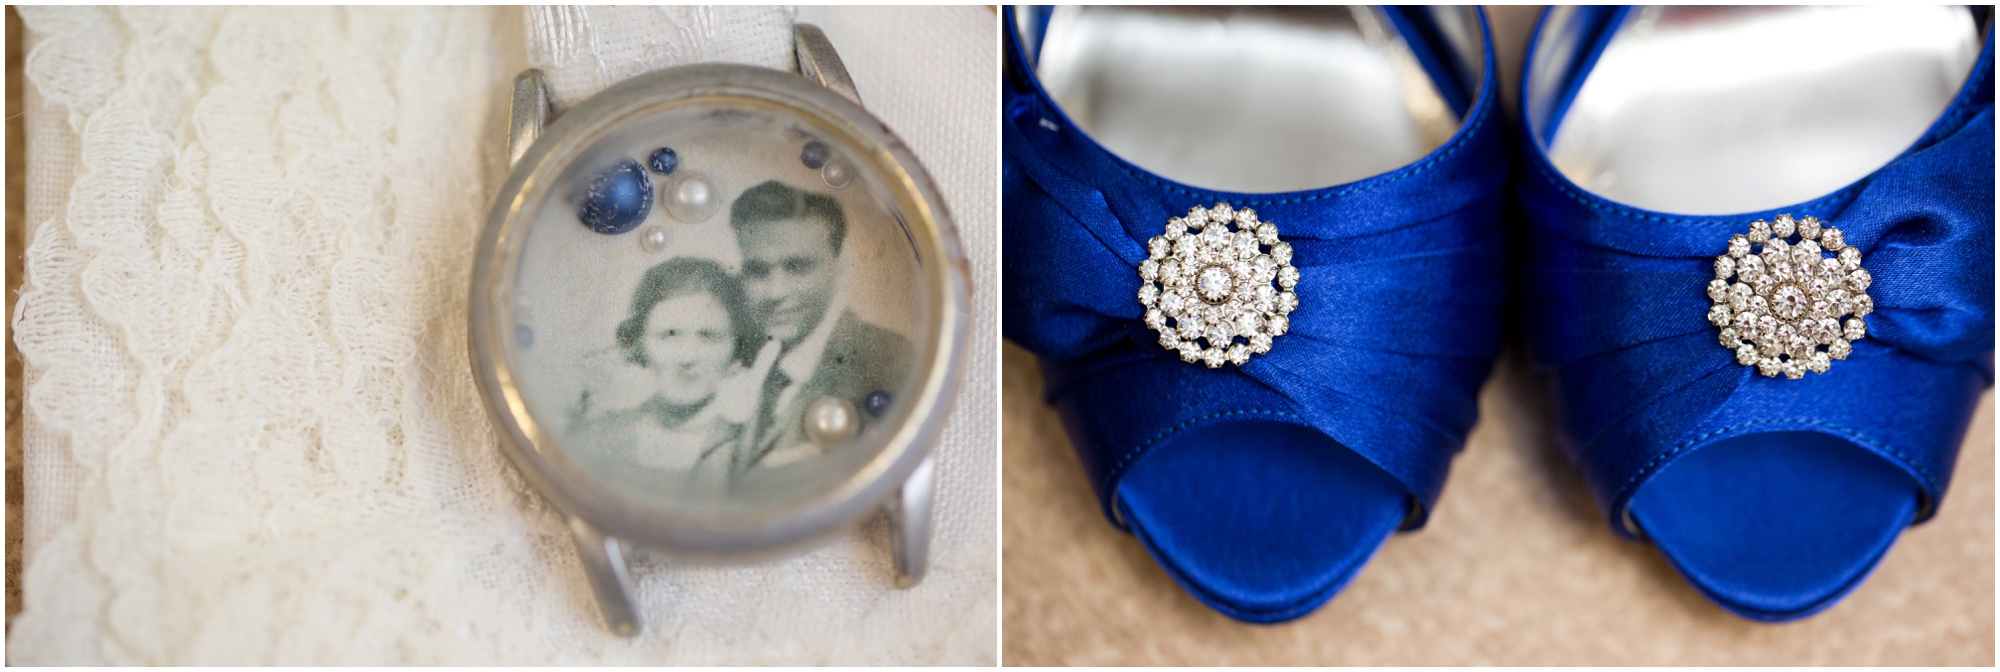 blue_pearl_old_watch_photo_shoes_jewels